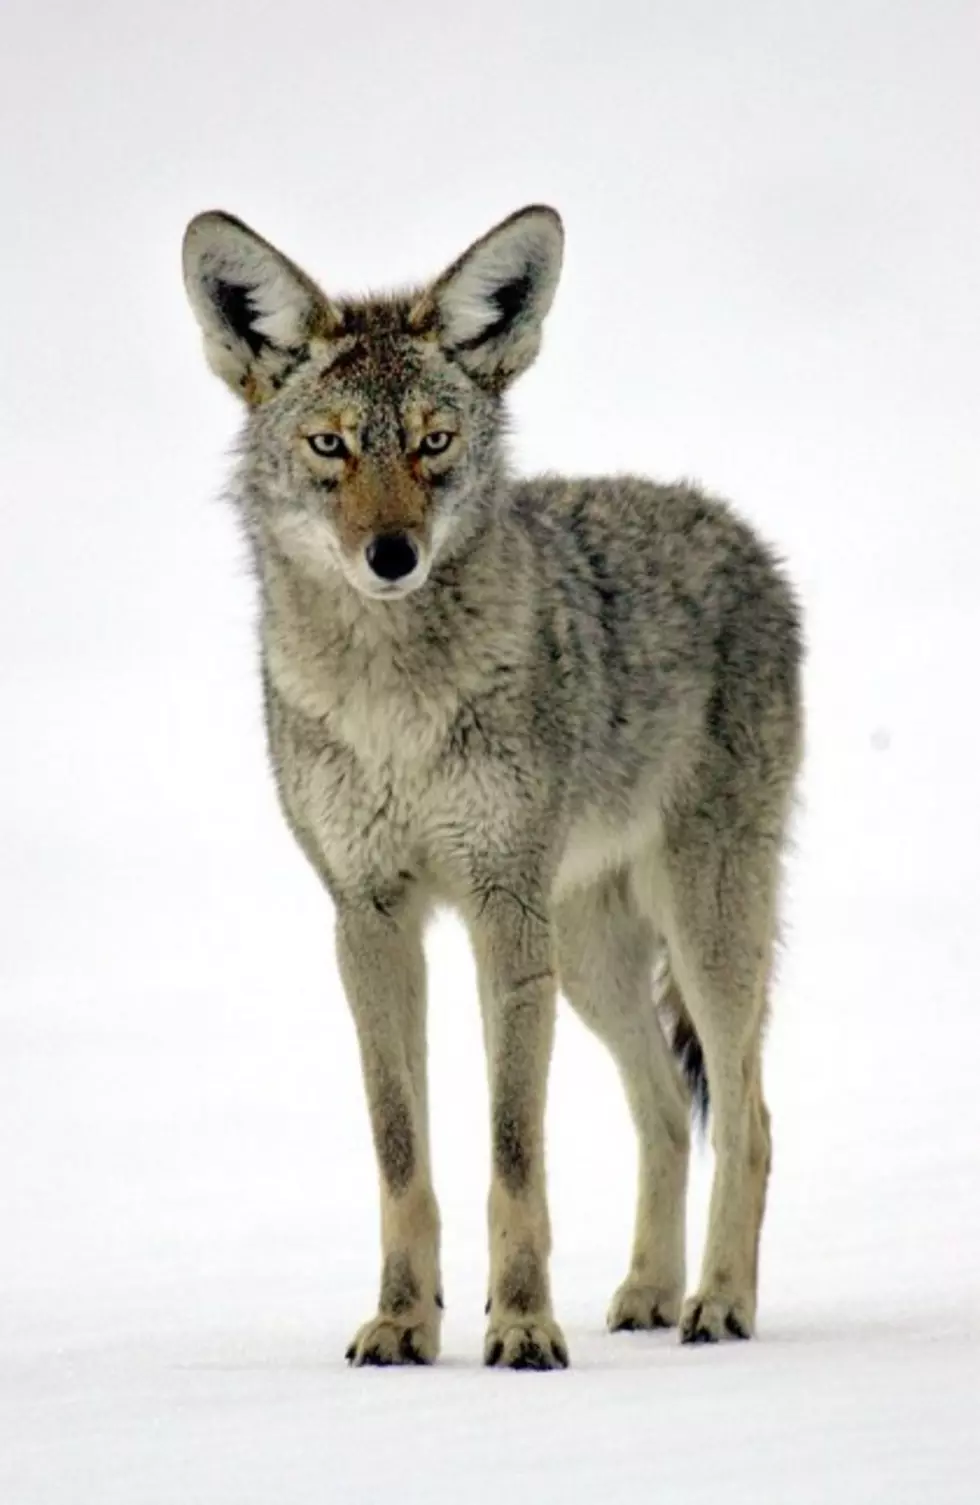 Reports of Protective Mother Coyotes at Table Rock